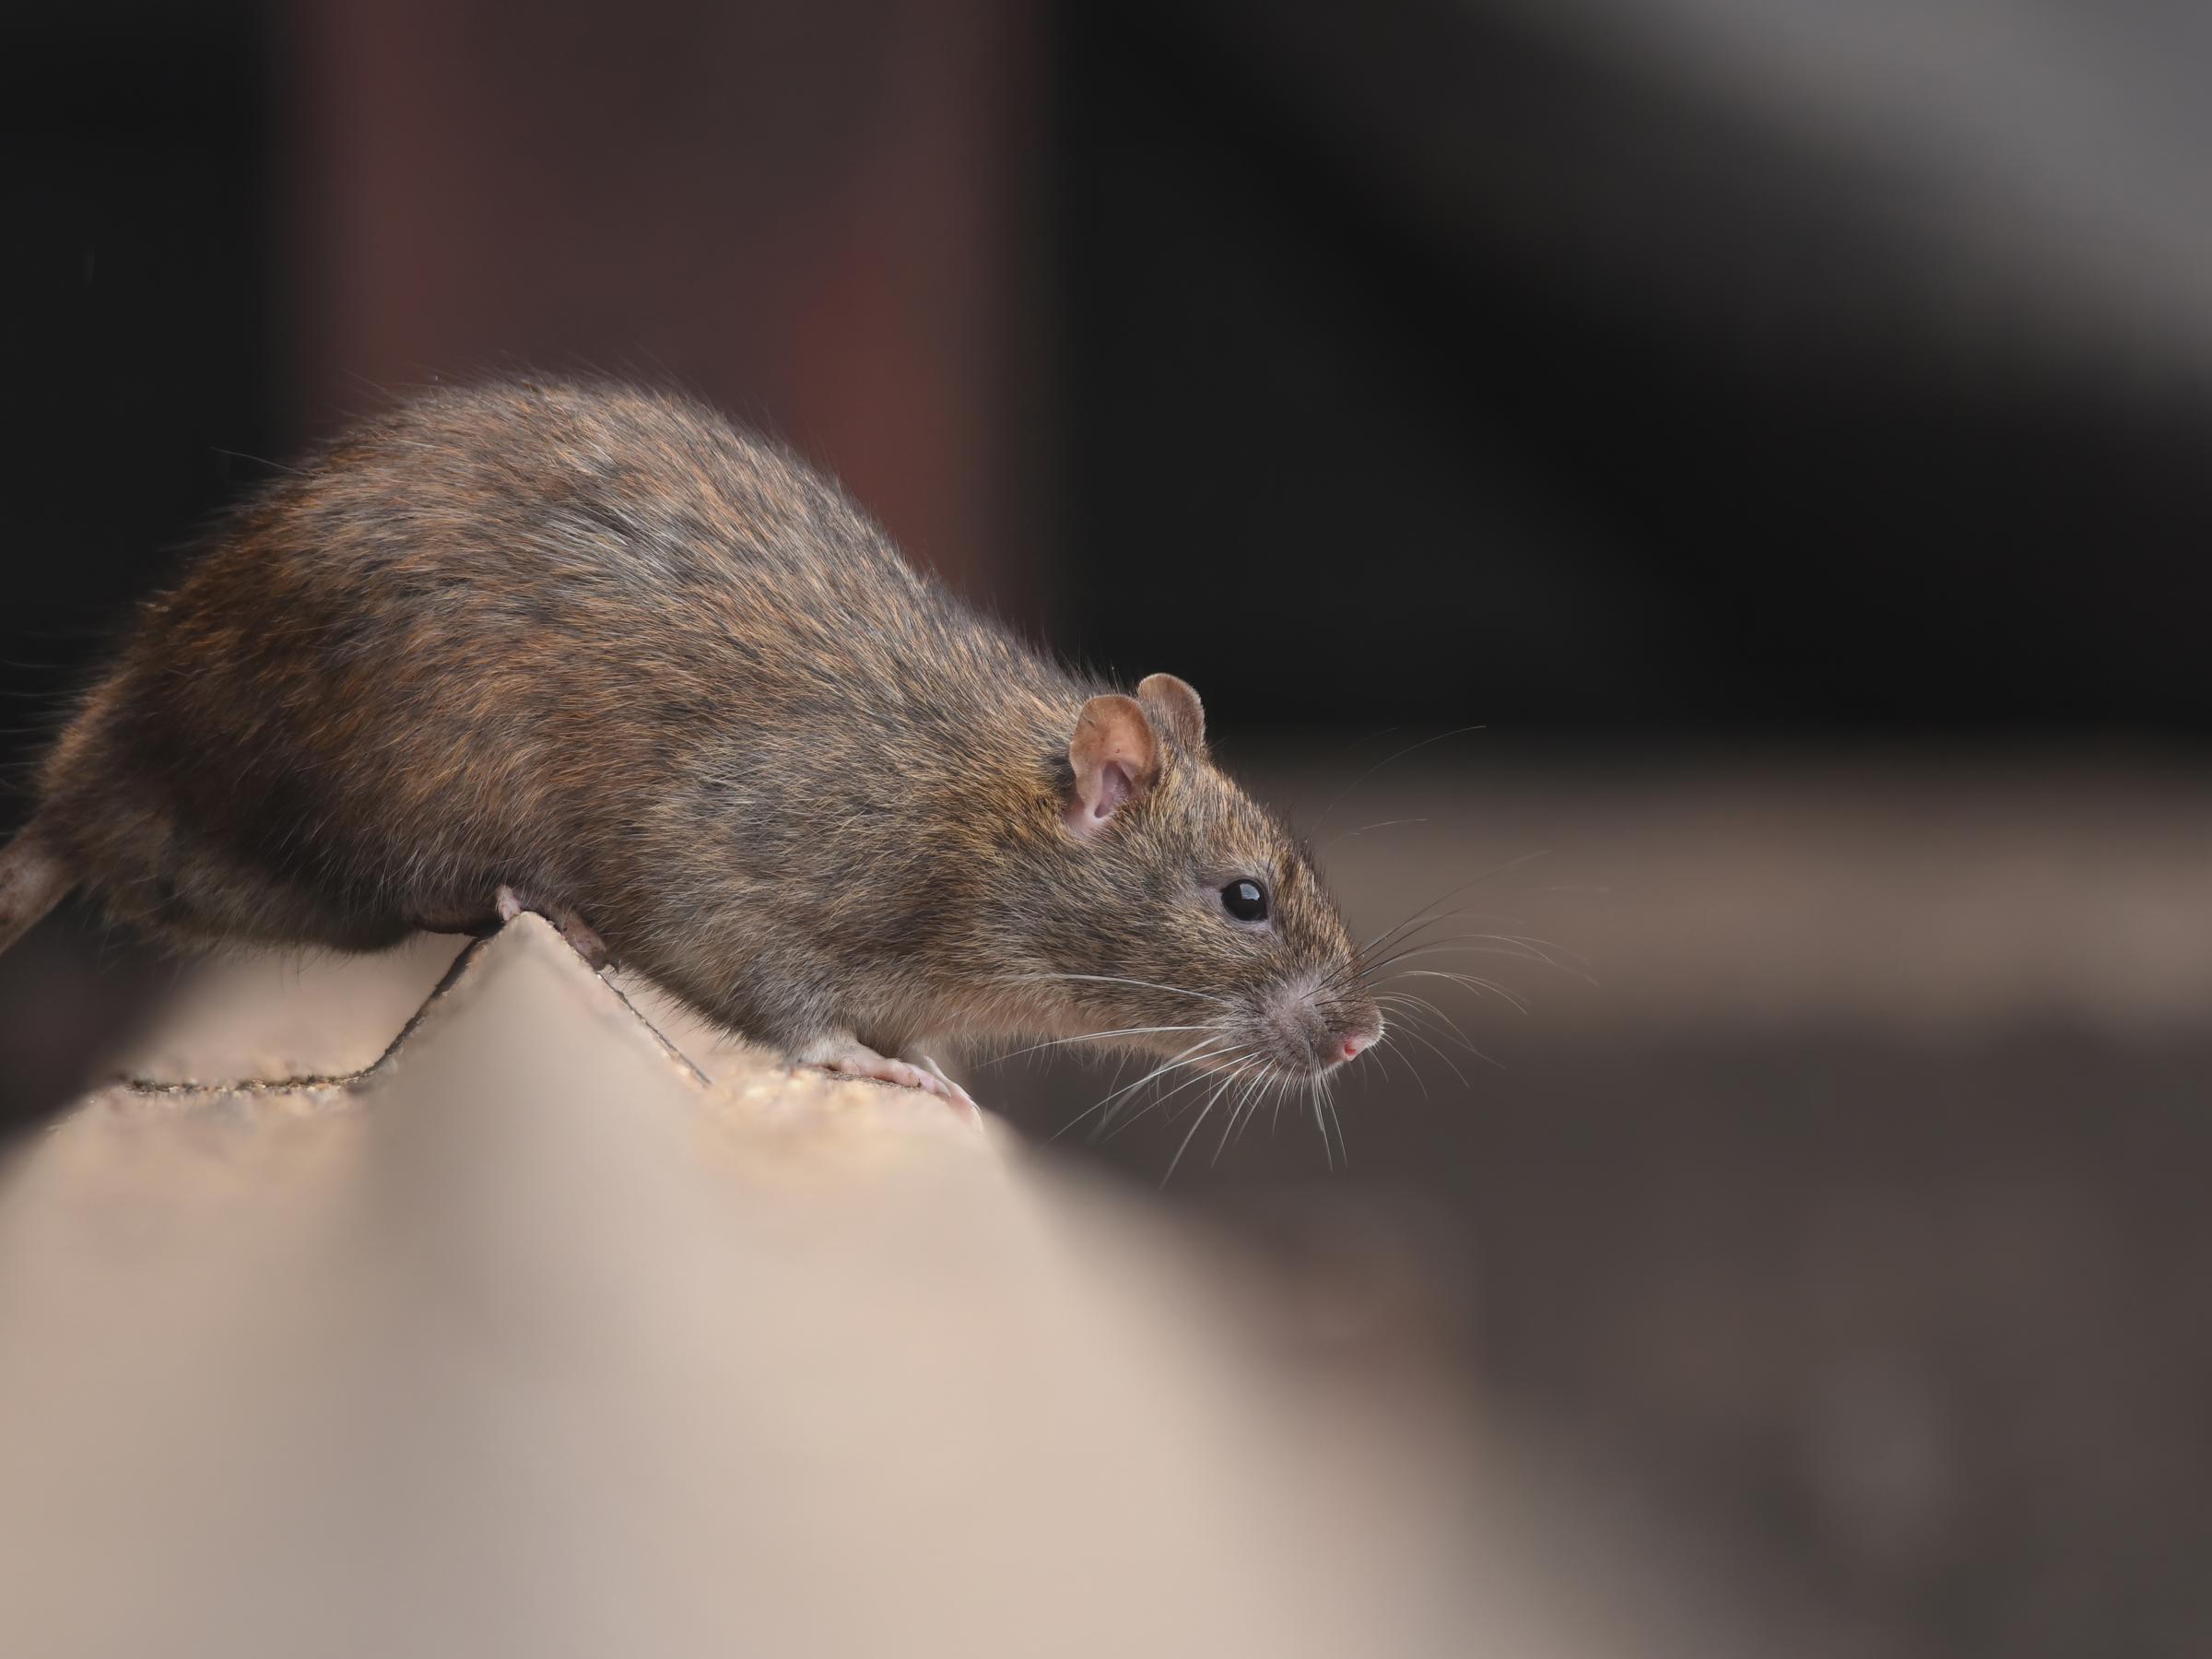 Rat infestations - Identify and prevent rodent infestations